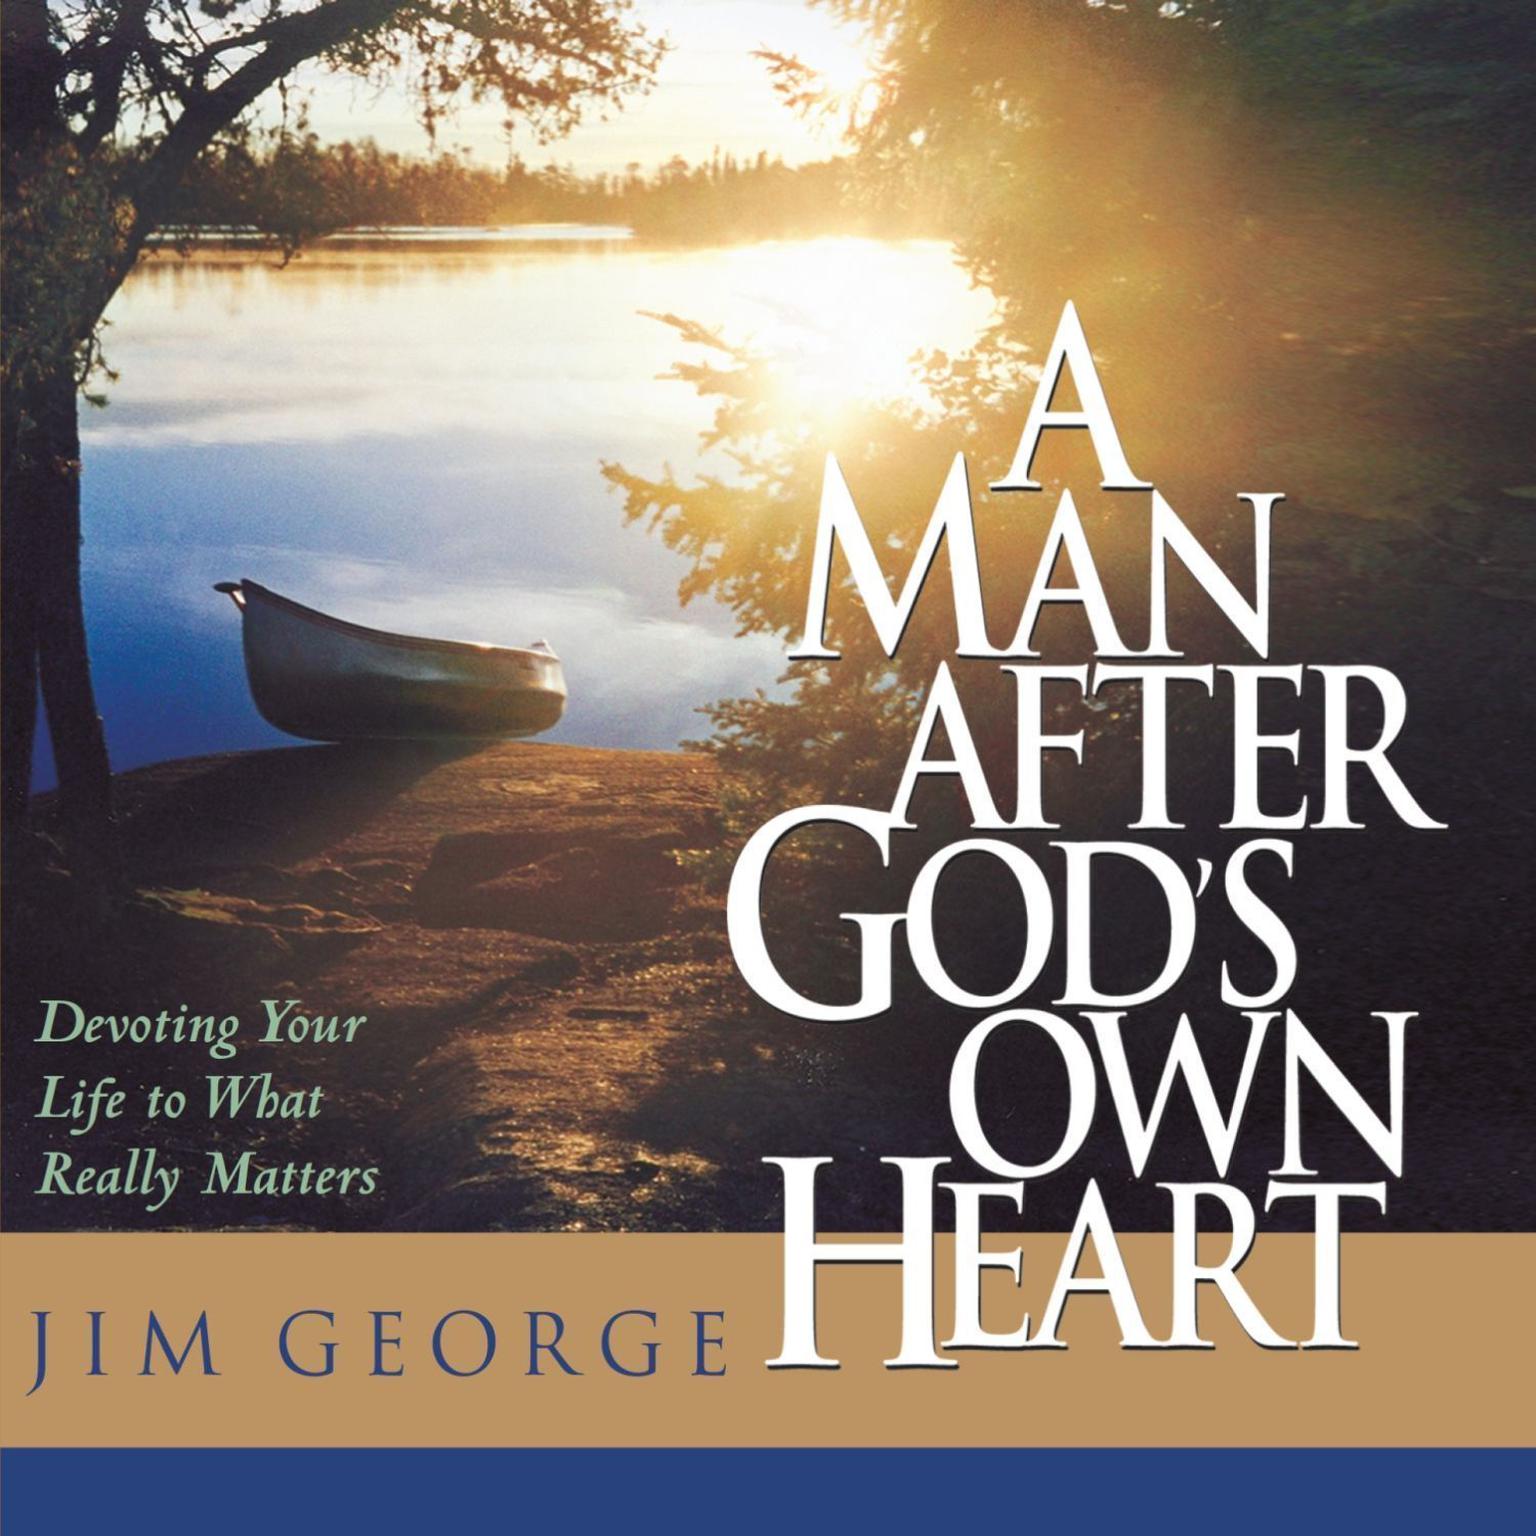 A Man After Gods Own Heart (Abridged): Devoting Your Life to What Really Matters Audiobook, by Jim George